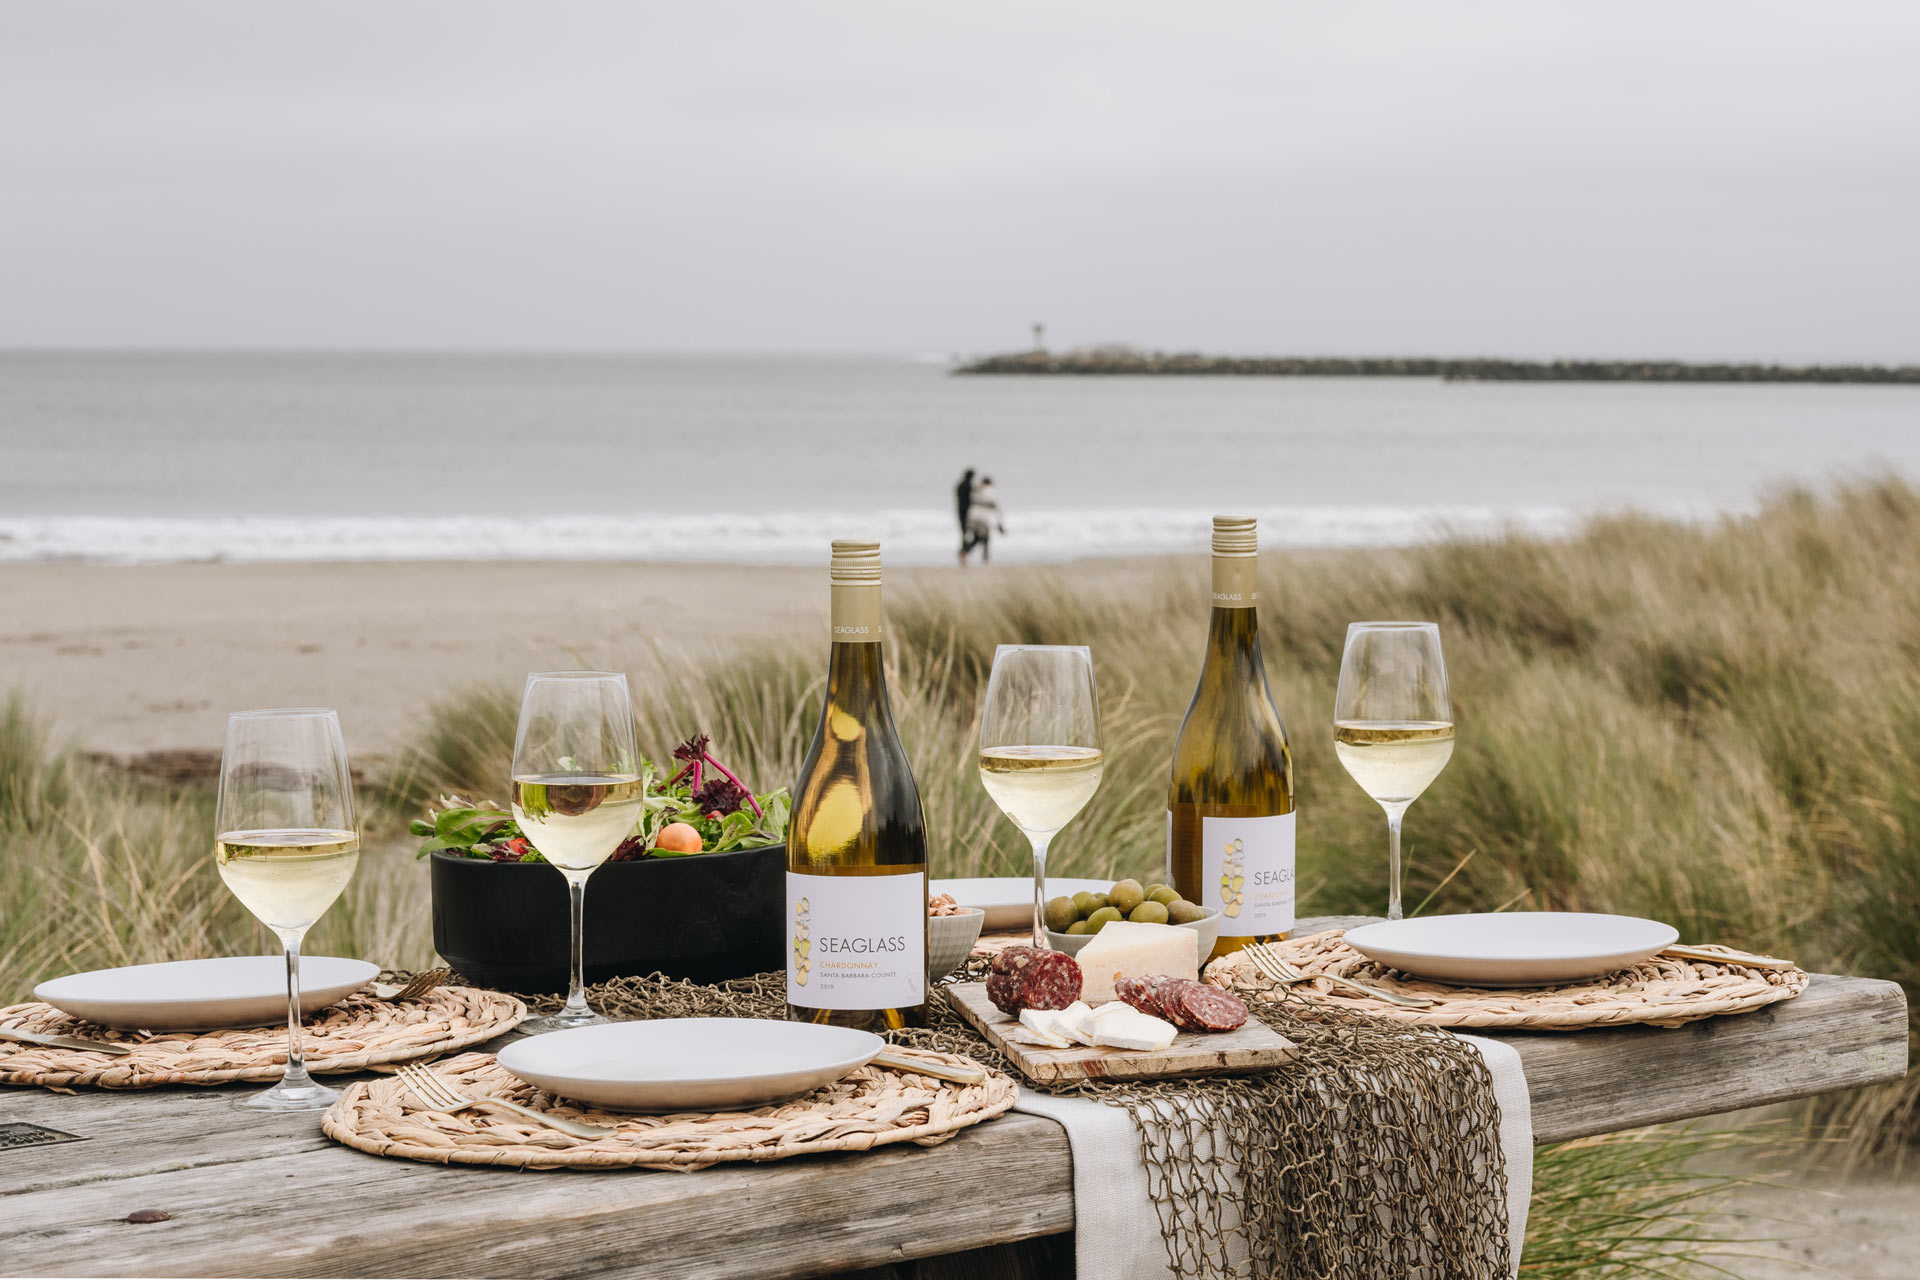 Glasses of wine on the beach